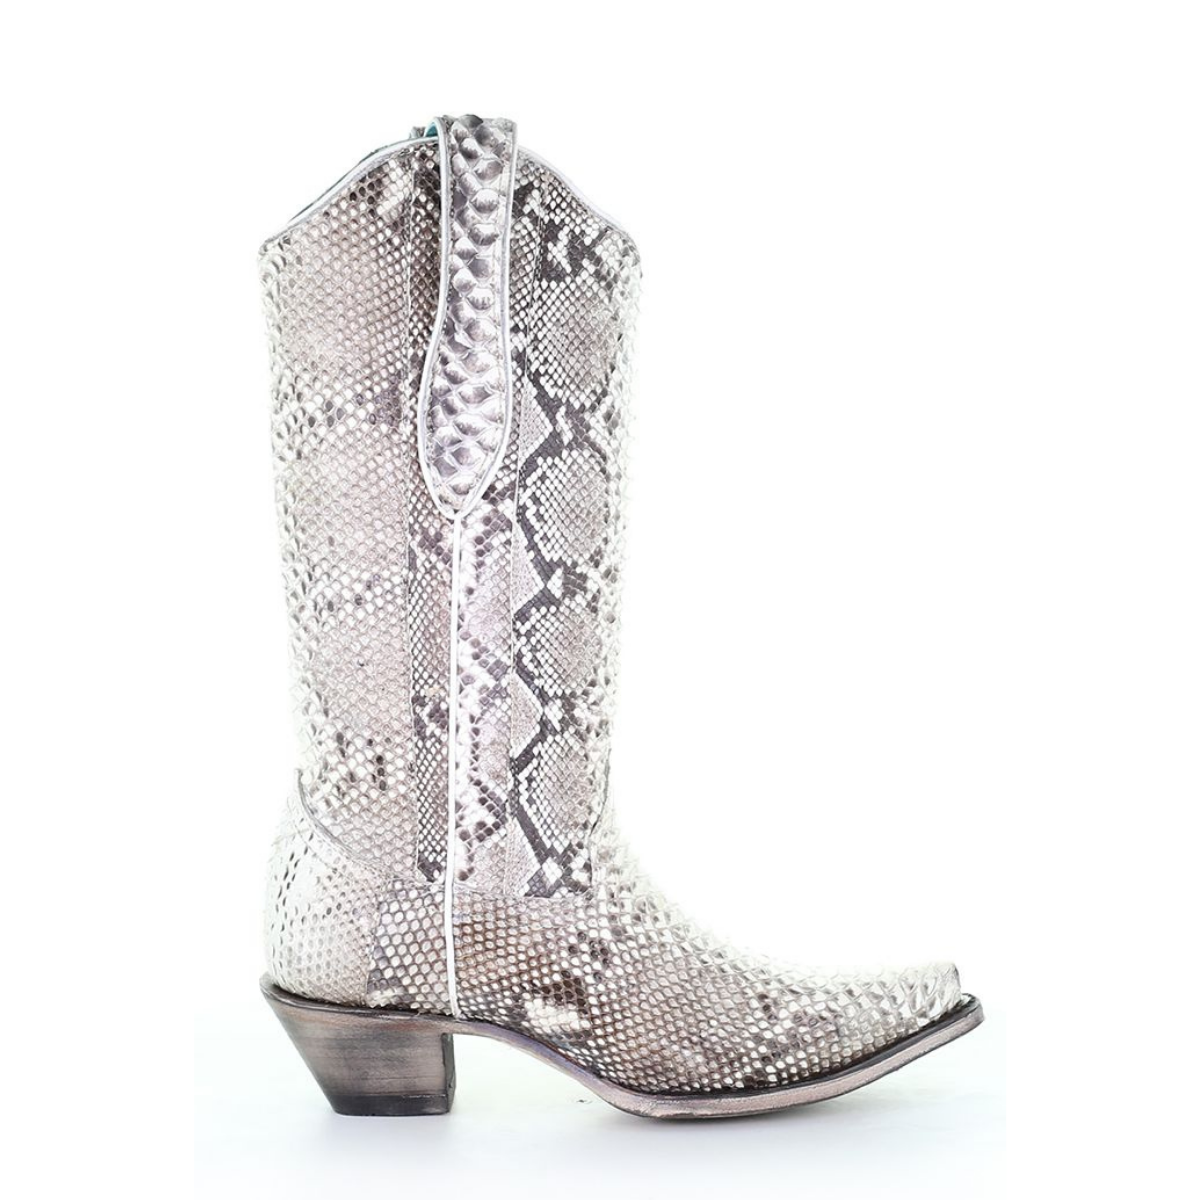 Women's Corral Python Exotic Boots Handcrafted Natural - yeehawcowboy